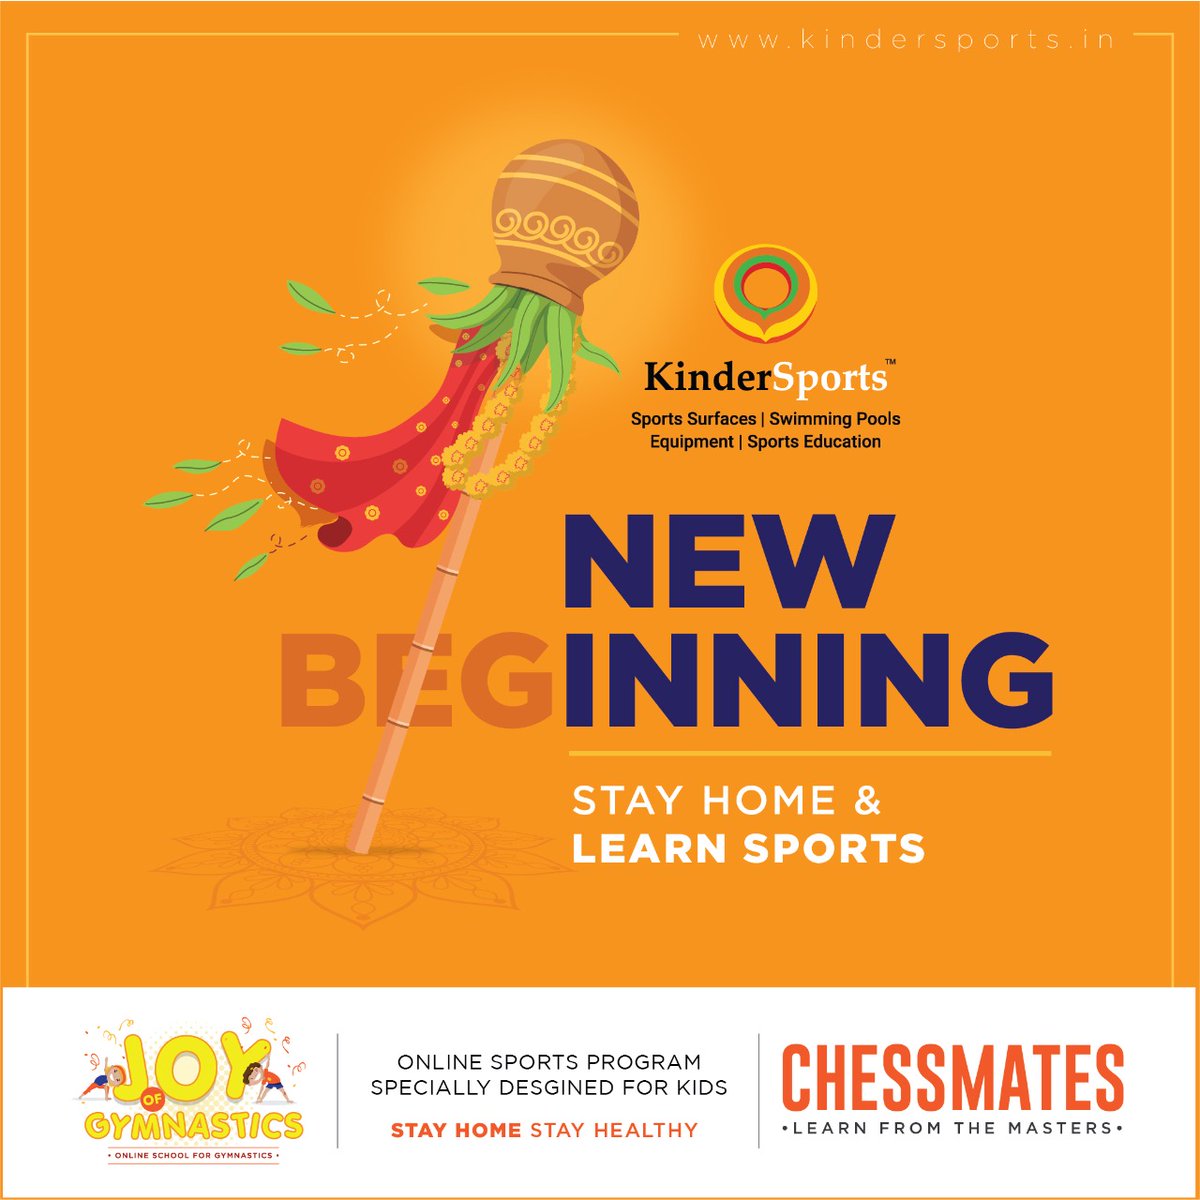 Let's start a healthy new inning by learning sports online!
Happy and healthy Gudi Padwa to all!
.
.
#HappyGudiPadwa #gudipadwa #gudi #gudipadwacelebration #chess #chessmate #gymnastics #joyofgymnastics #sportsequipment #sportsinfrastructure #sports #KinderSports